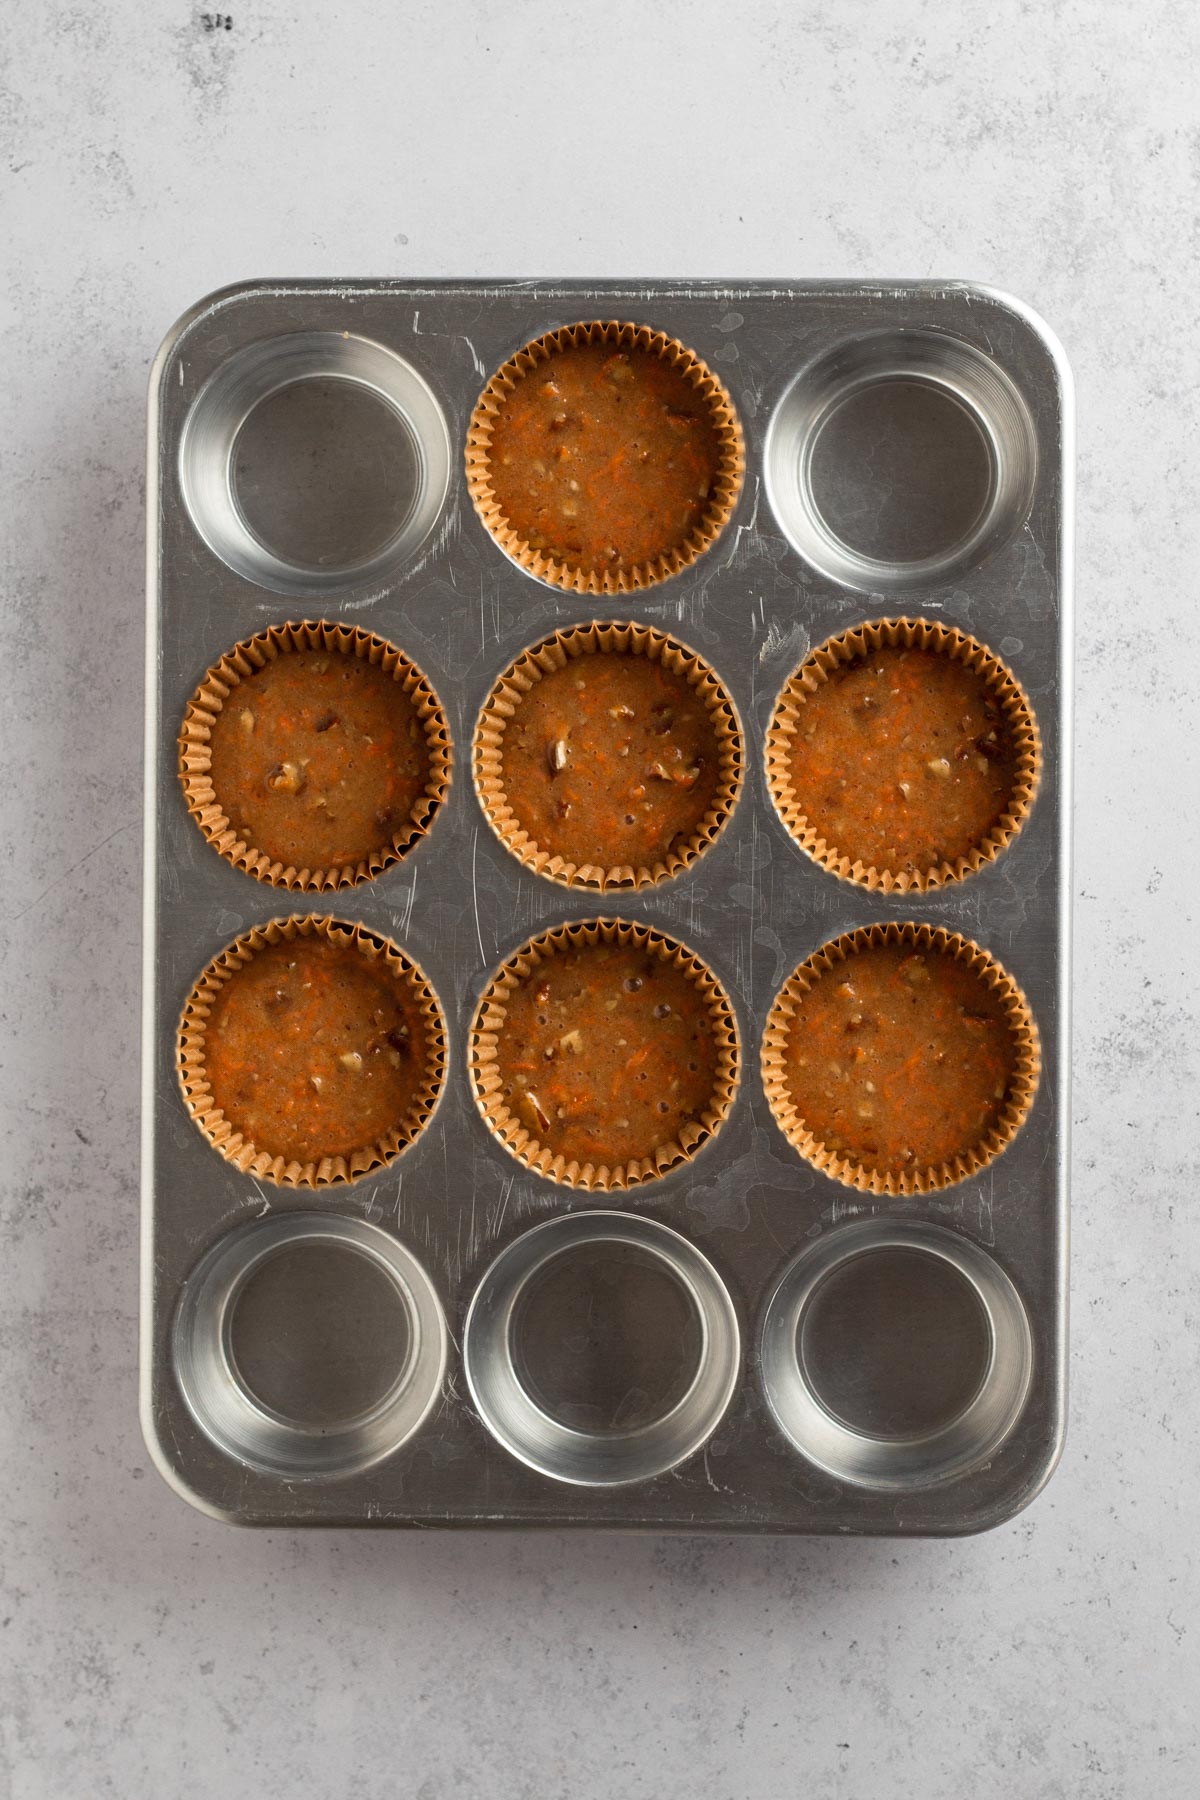 cupcake batter in liners in a muffin tin